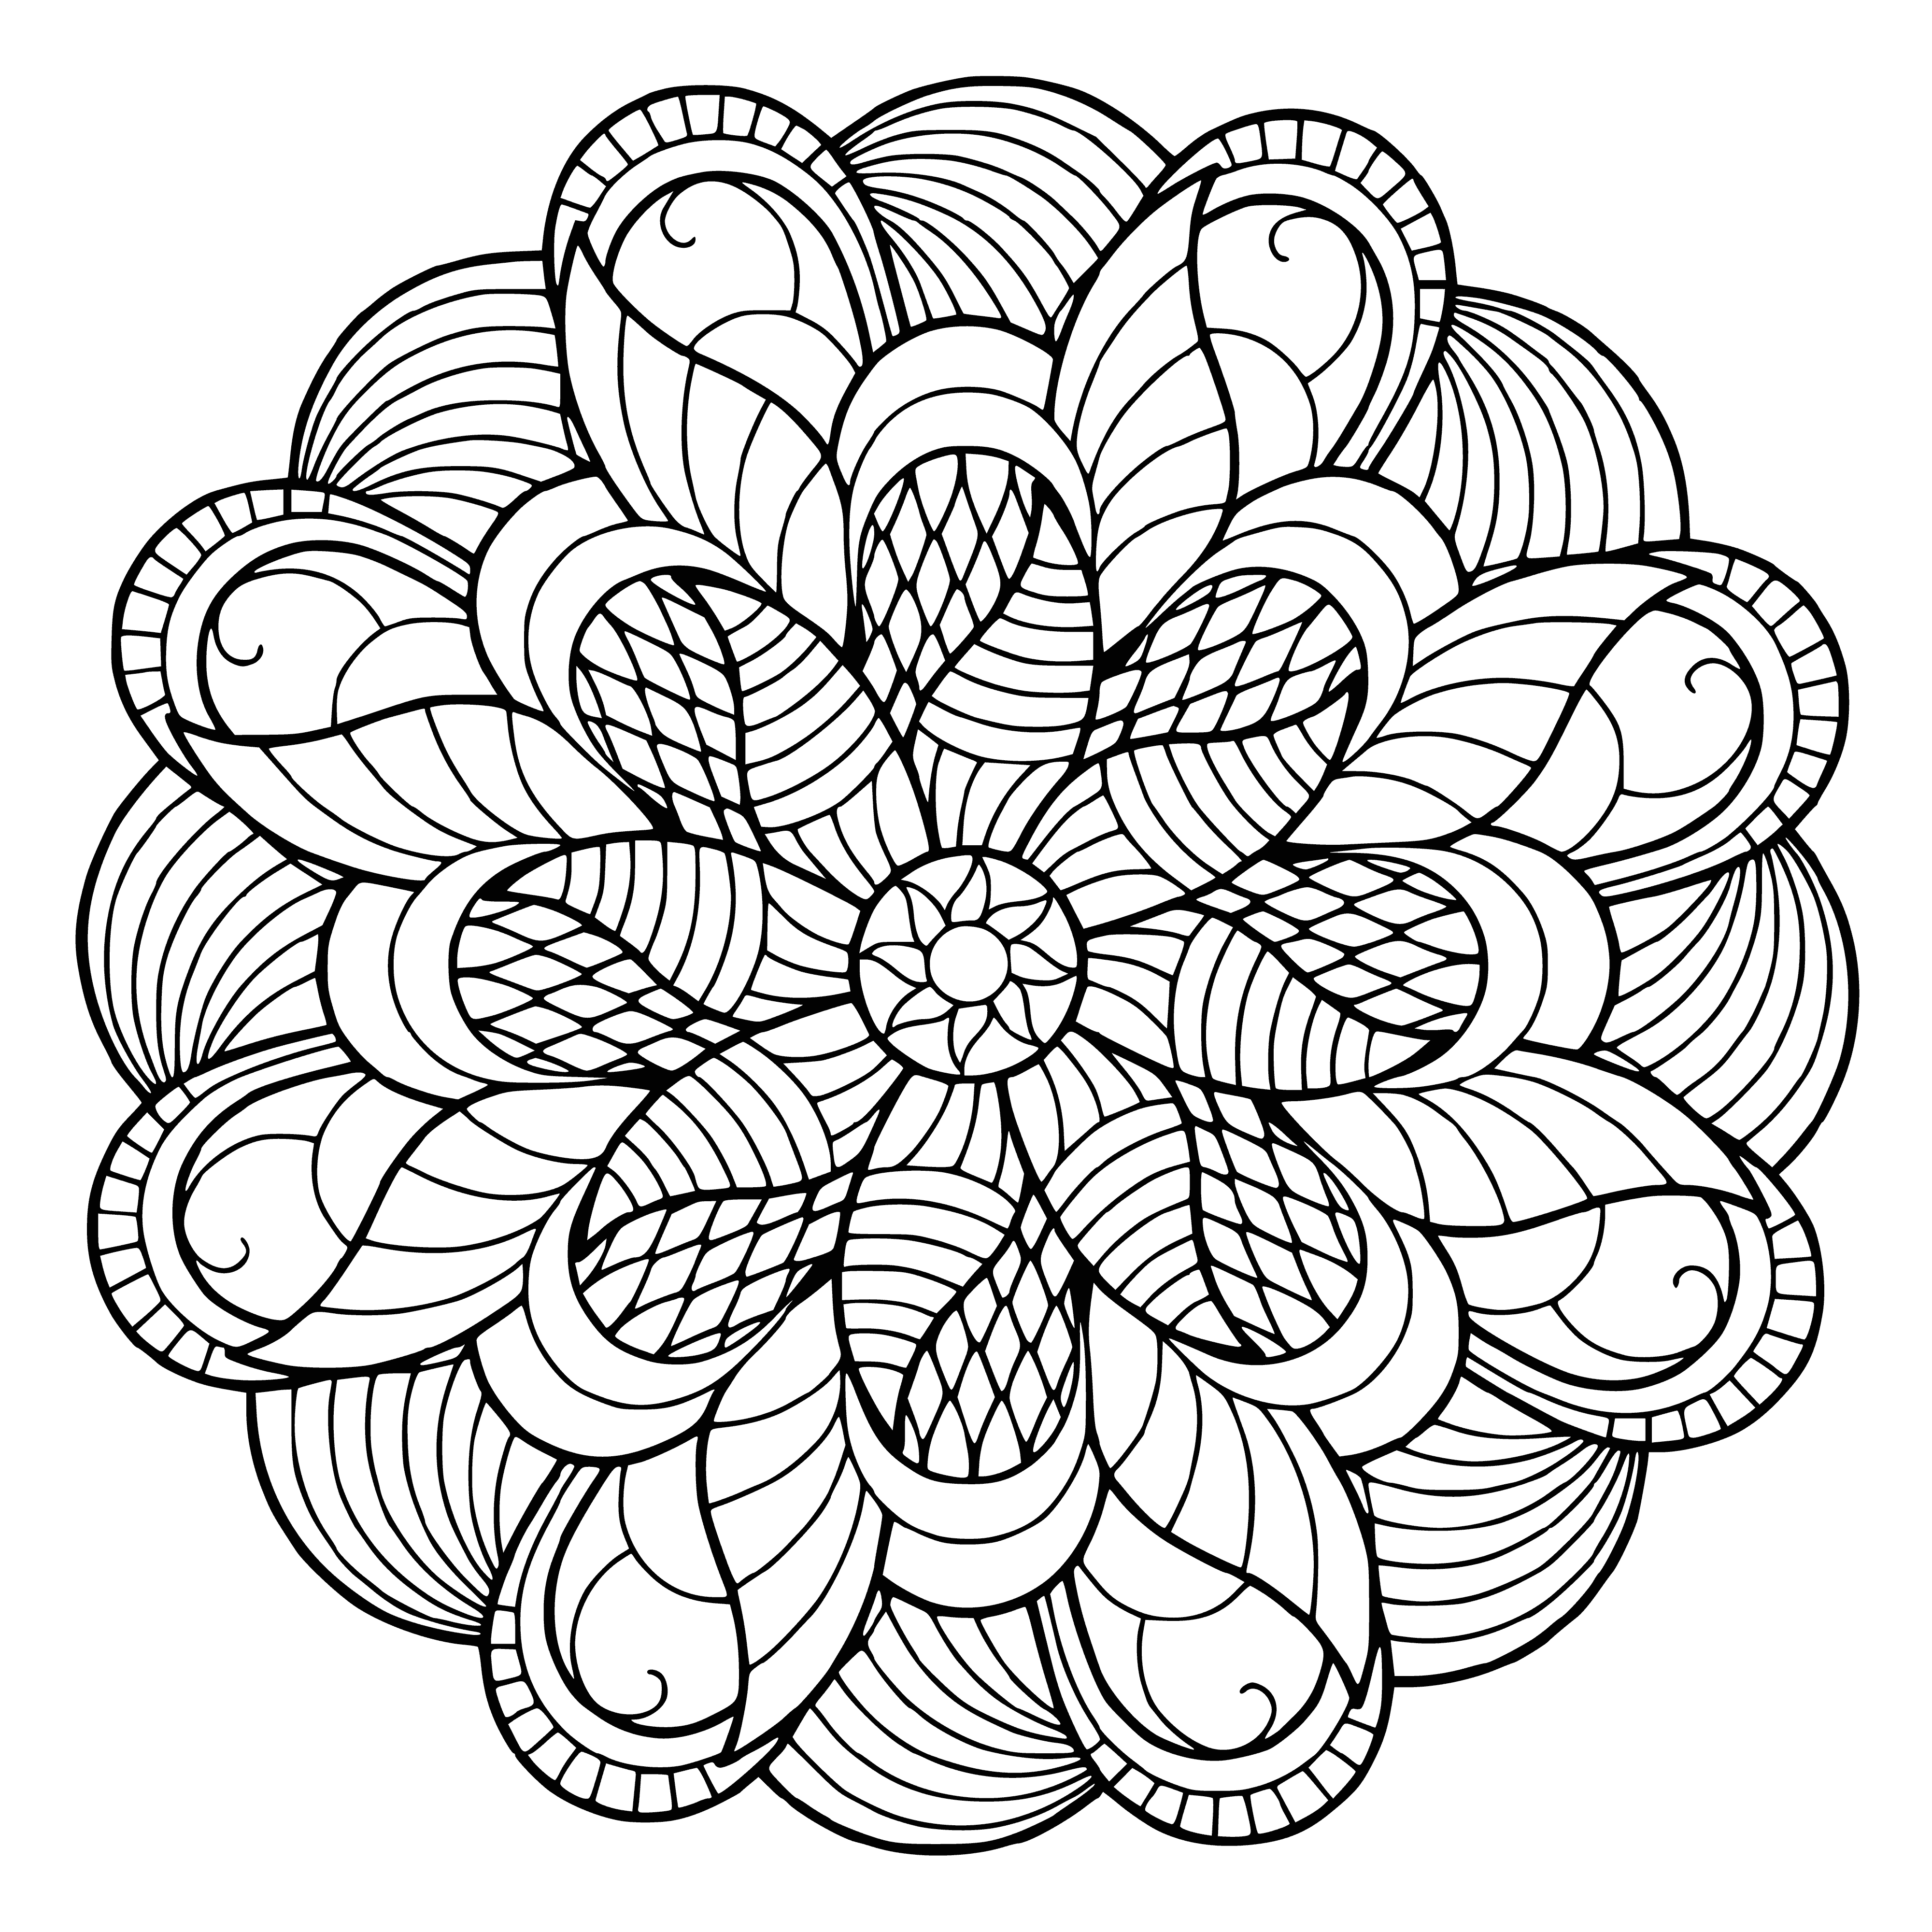 coloring page: Beautiful flower mandala design with 8 small flowers, 4 petals each and 8 leaves around it. Circle in the middle with a dot. #coloring #mandalas